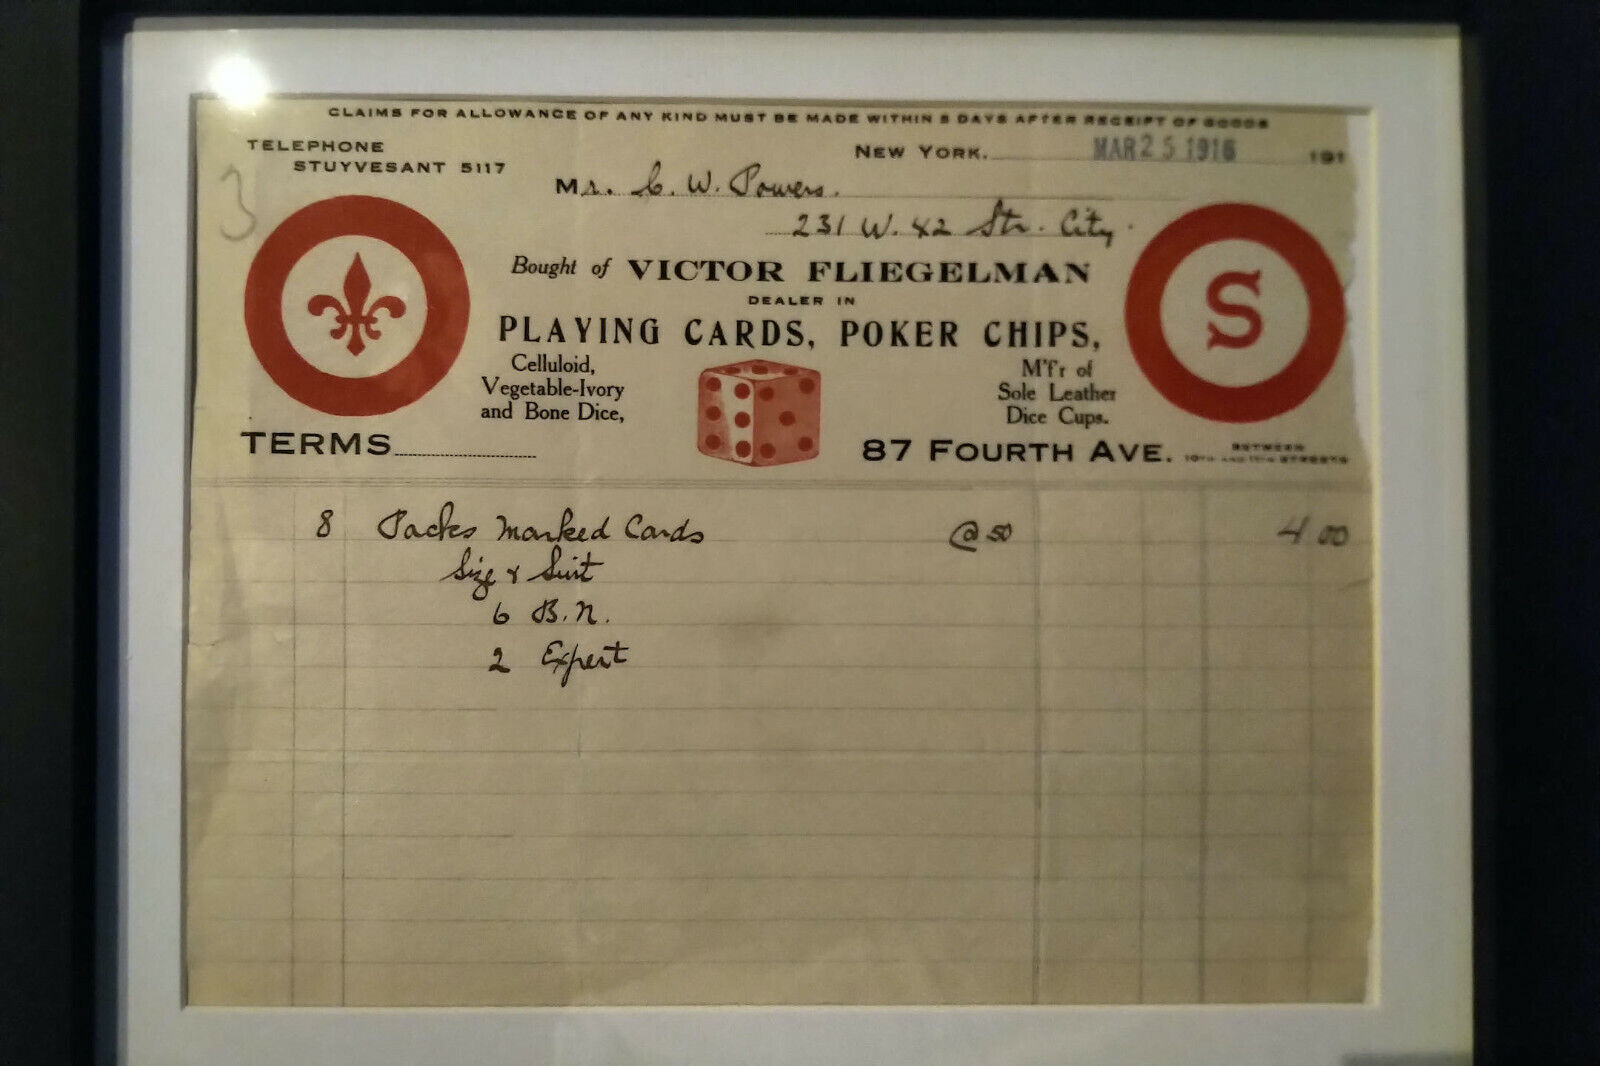 Victor Fliegelman, Playing Cards Original Invoice from 1916